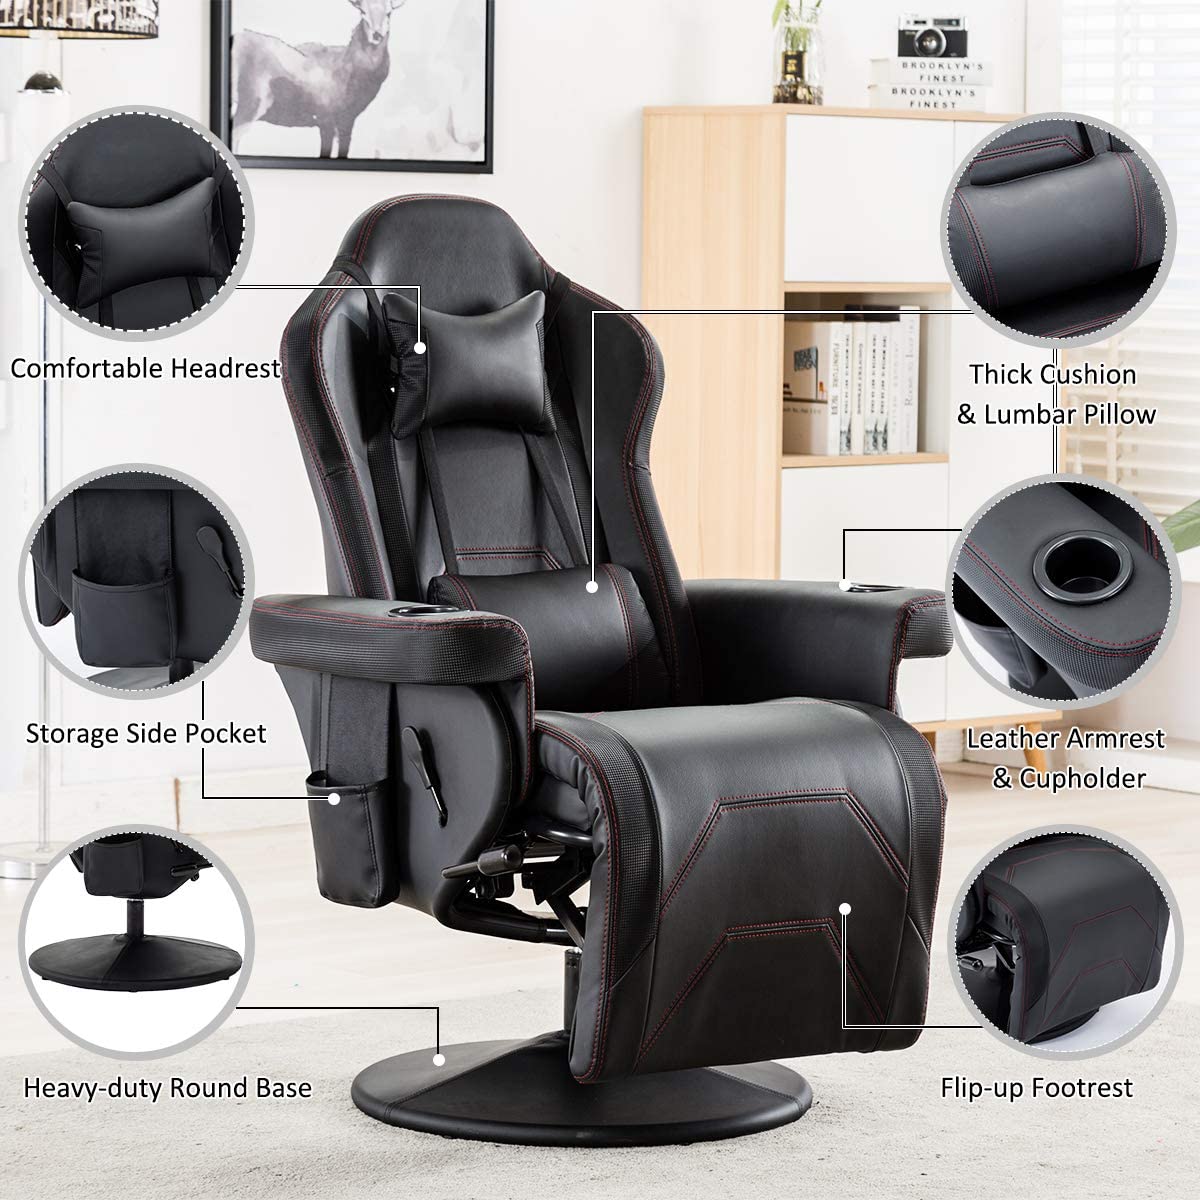 Merax Gaming Recliner Gaming Chair Desk Chair with Footrest,Headrest,Lumbar Pillow,2 Cup holders, 2 Removable Side Pouches